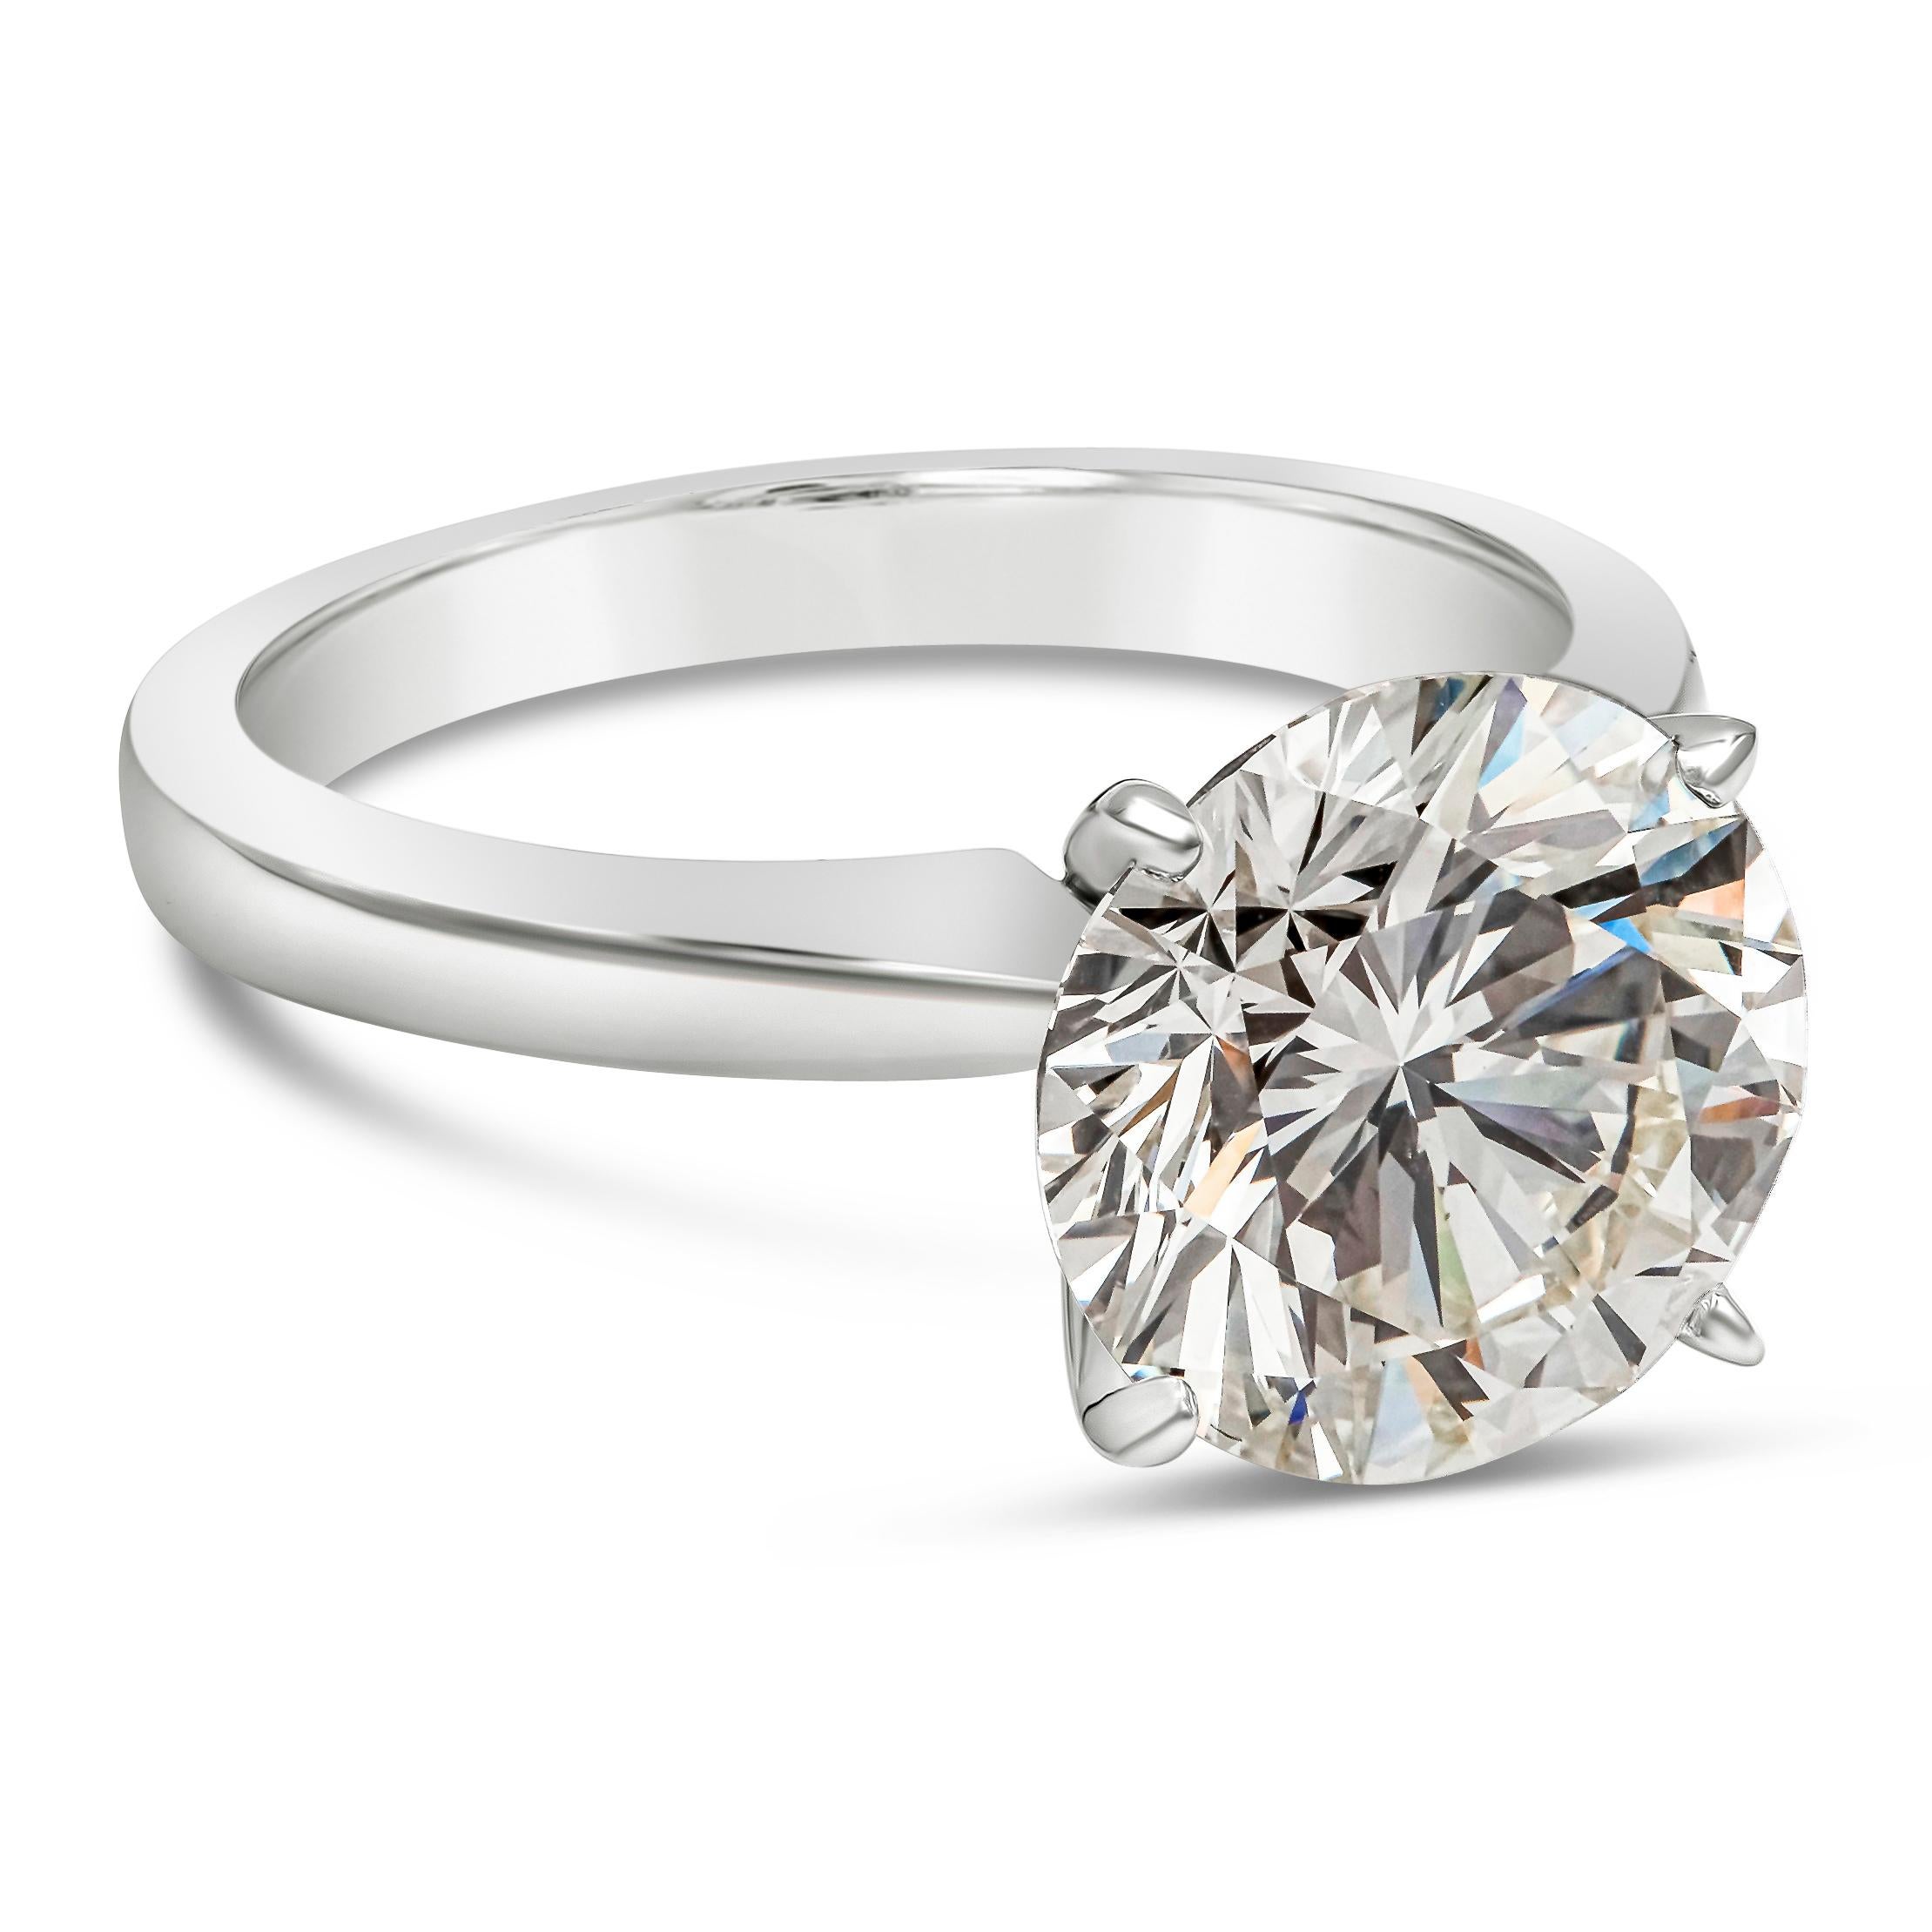 This elegant and classic solitaire engagement ring style showcases a brilliant round diamond weighing 3.68 carats total, K color and VS2 in clarity, set in a four prong basket setting. Finely made in 18k white gold. Size 6 US resizable upon